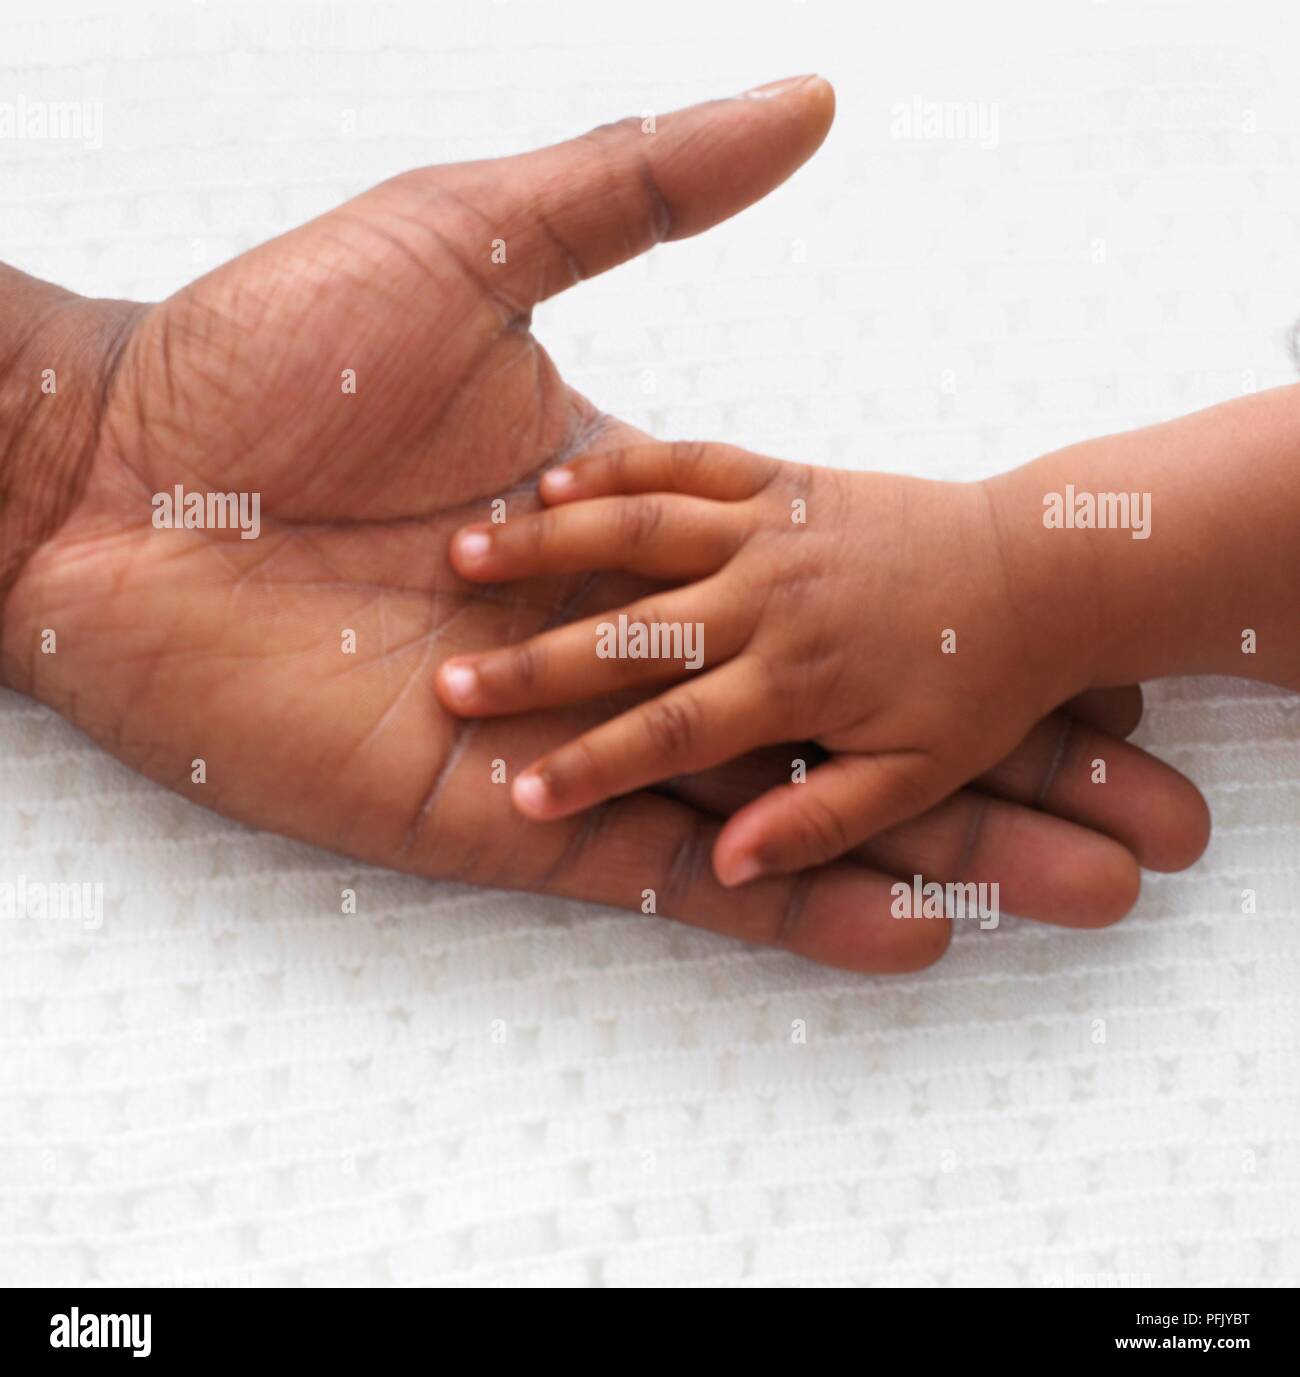 Baby Boy's hand on man's palm, close-up Banque D'Images